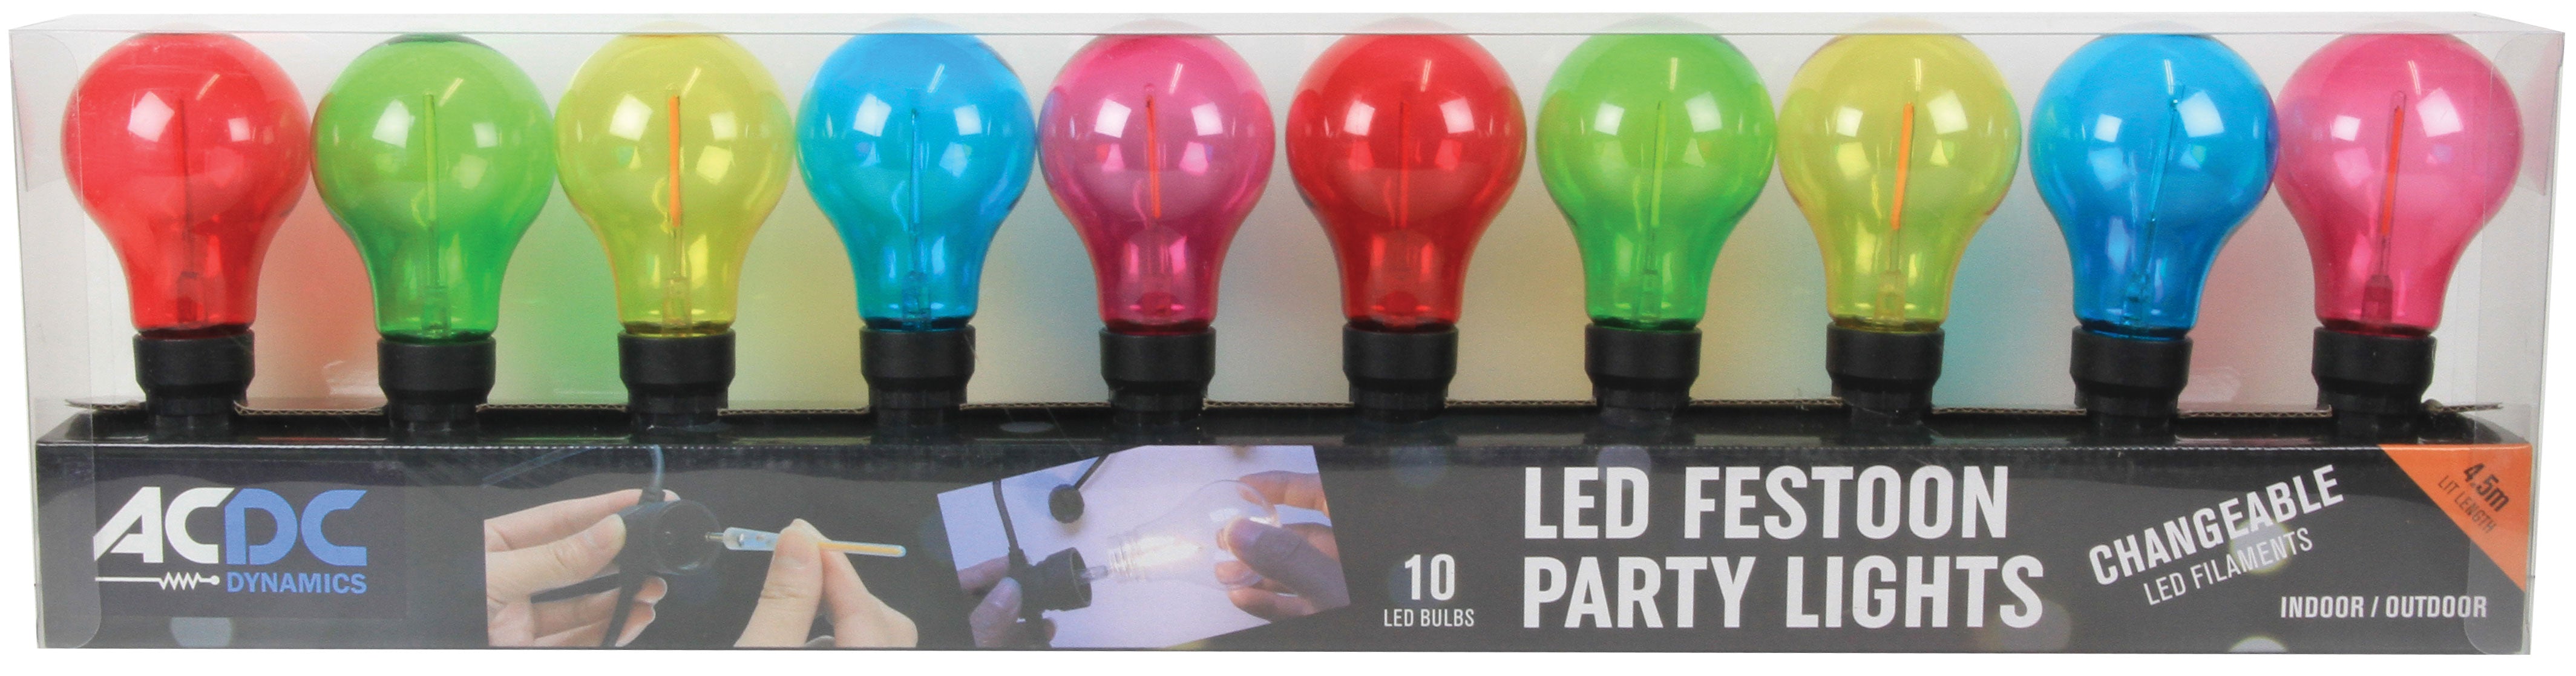 Party Lights - 5 Meter Festoon Light Cable including Bulbs - Future Light - LED Lights South Africa